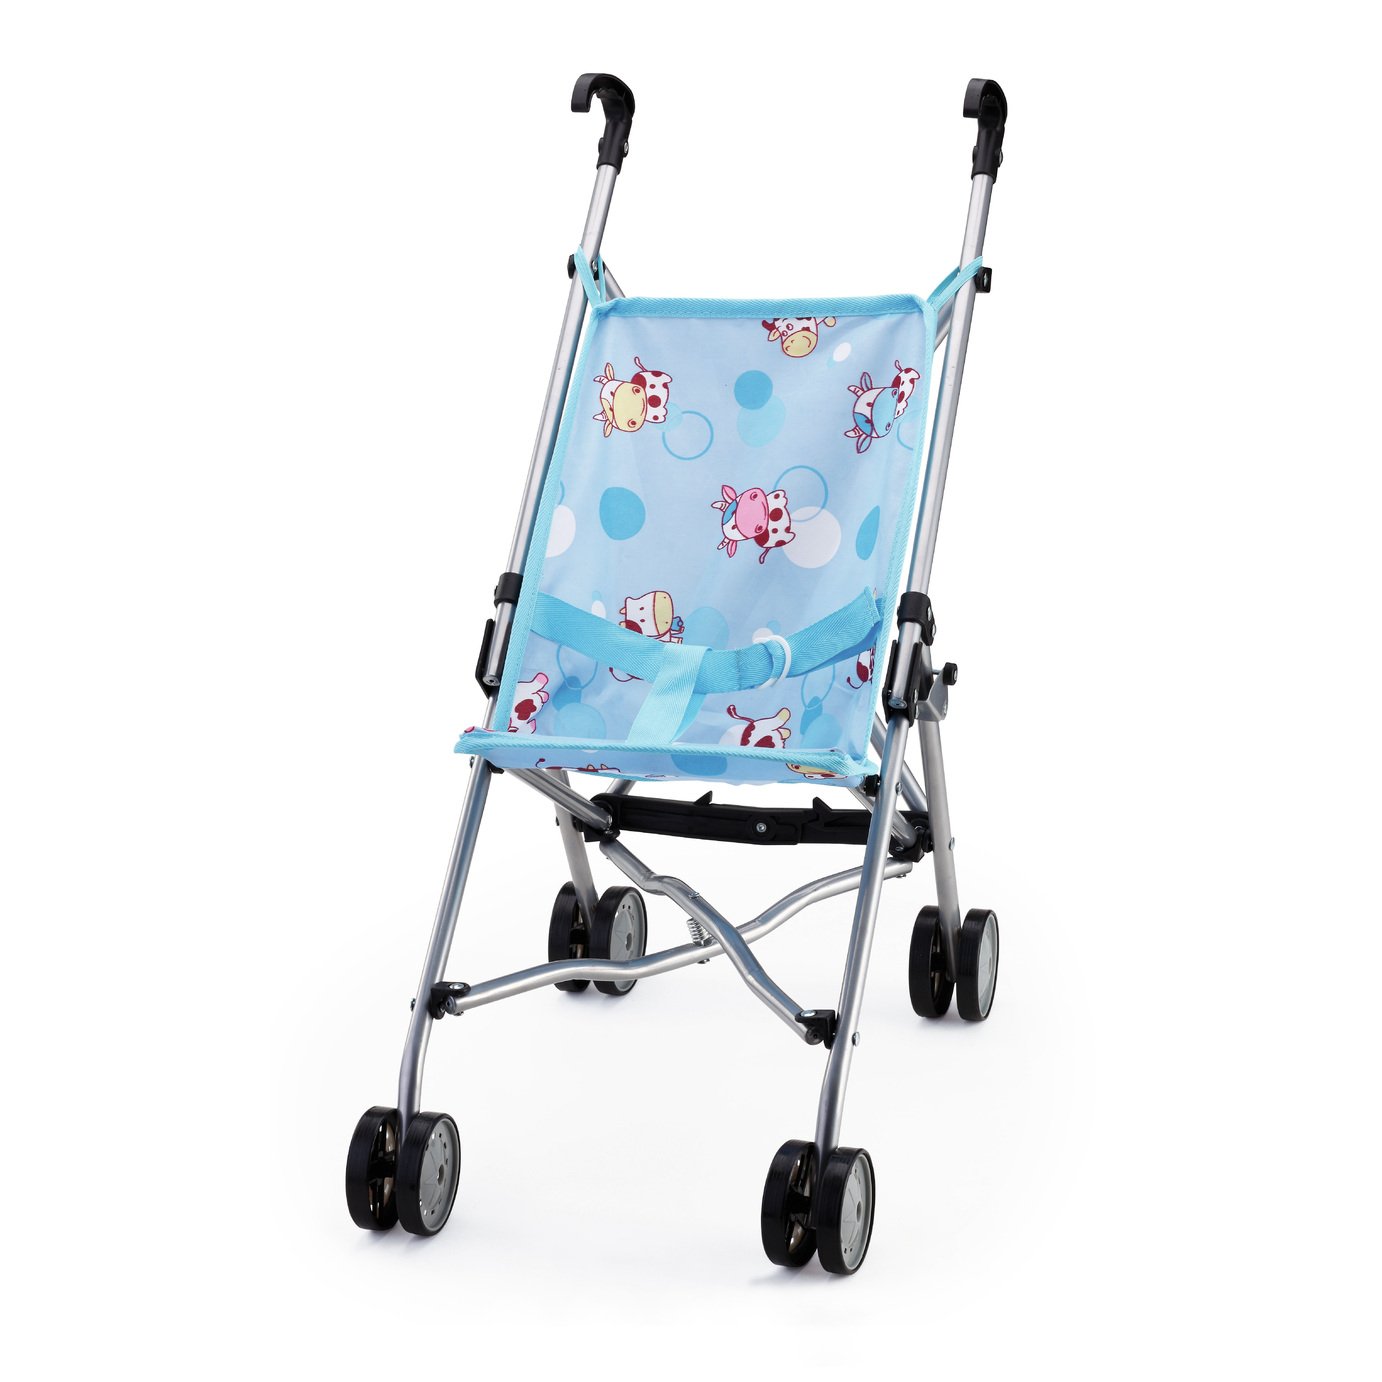 Bayer Design Blue Cow Doll's Stroller Review